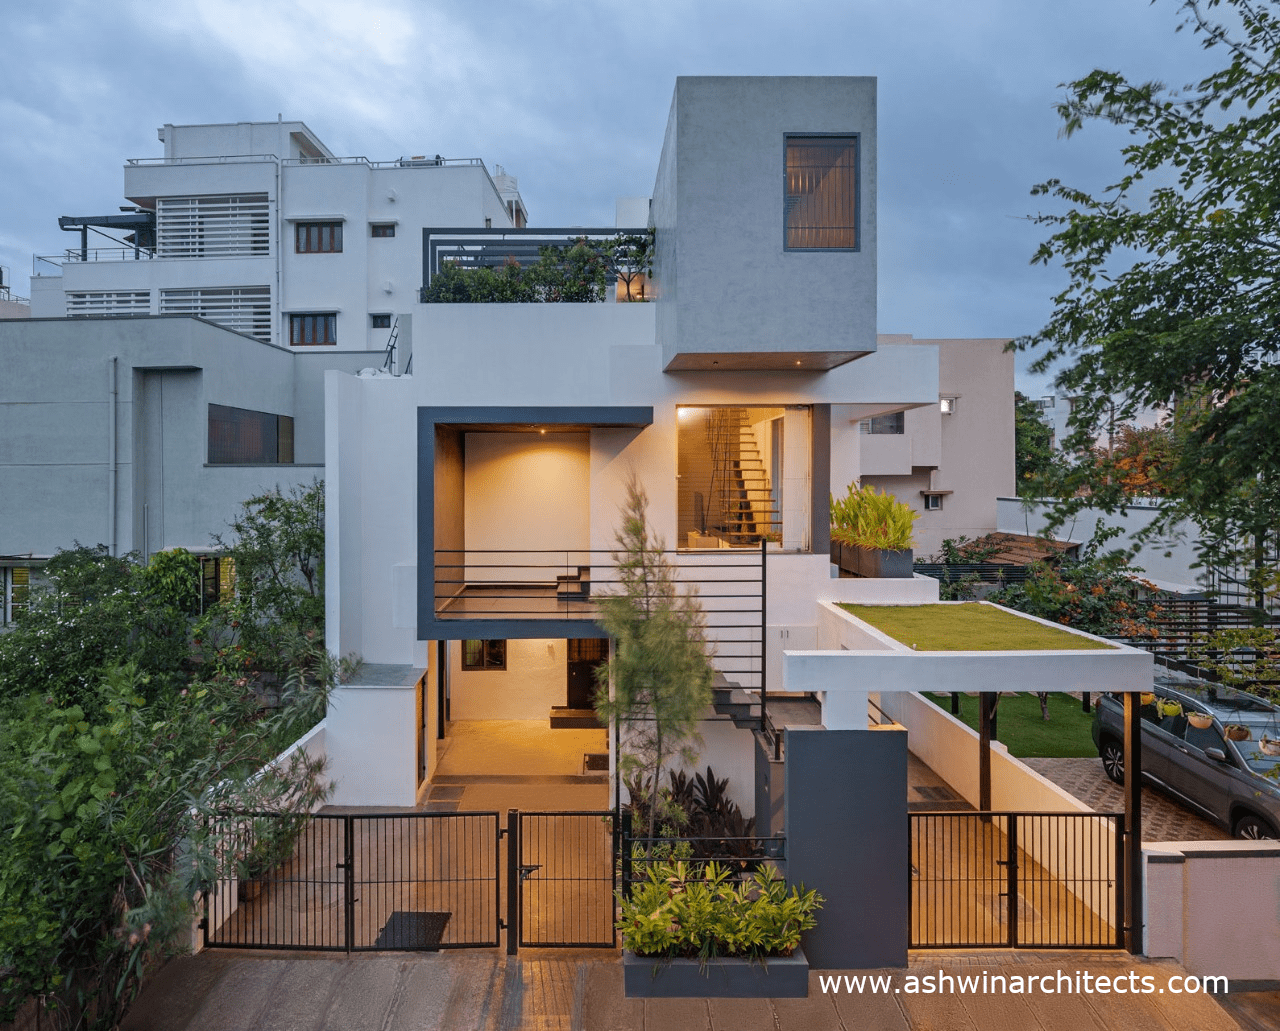 pawans-30-50-house-design-residential-architects-in-bangalore-evening-terrace